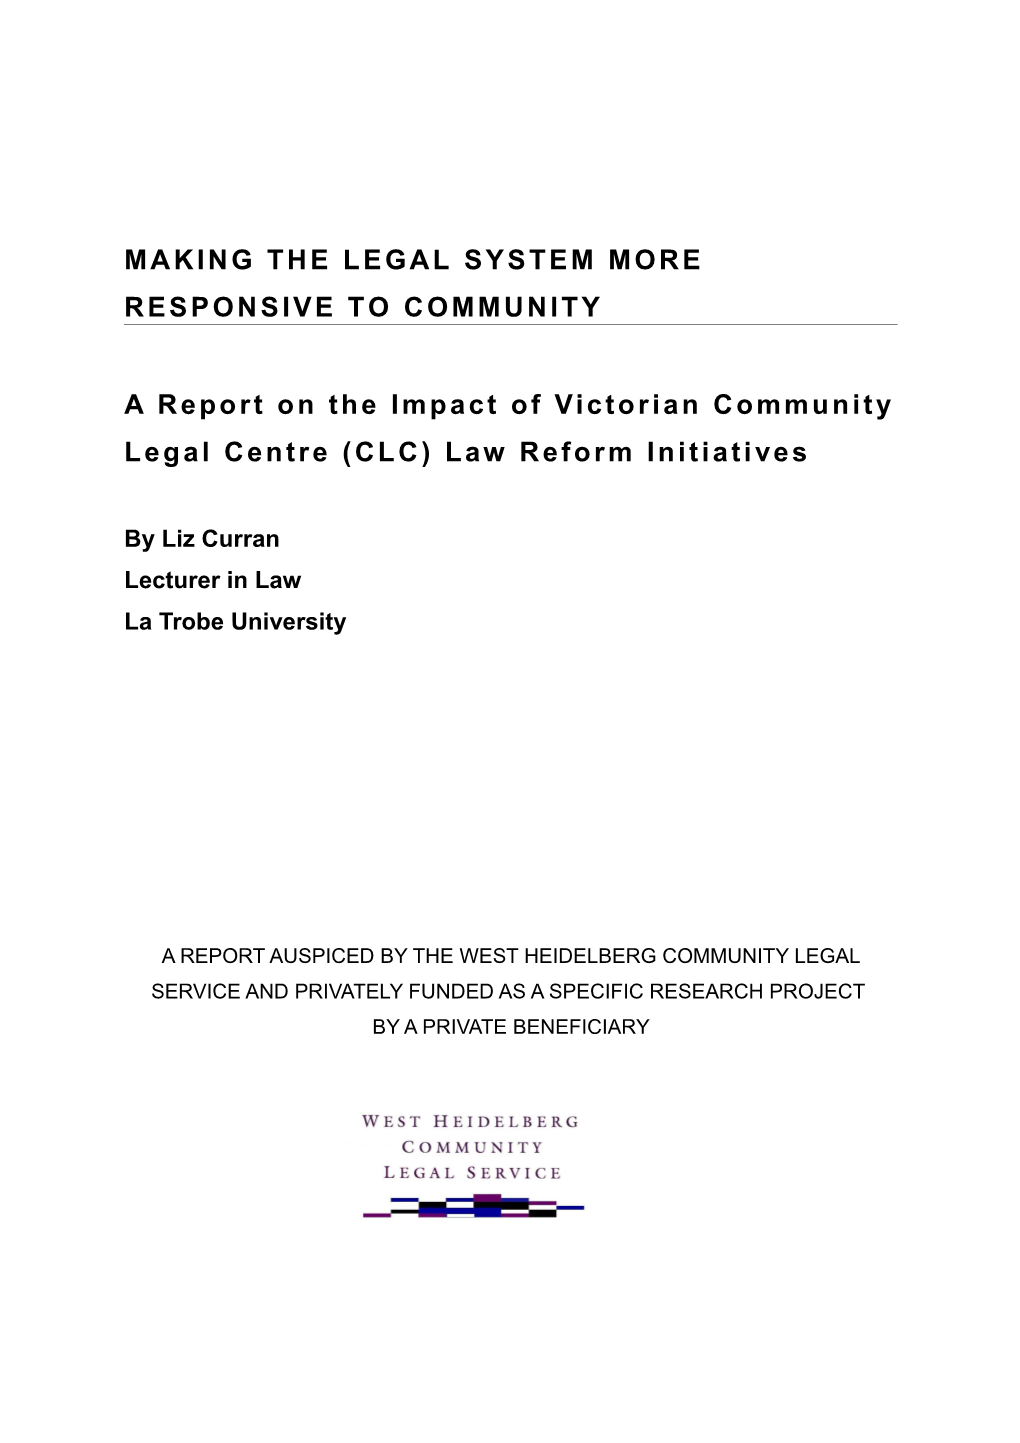 Making the Legal System More Responsive to Community